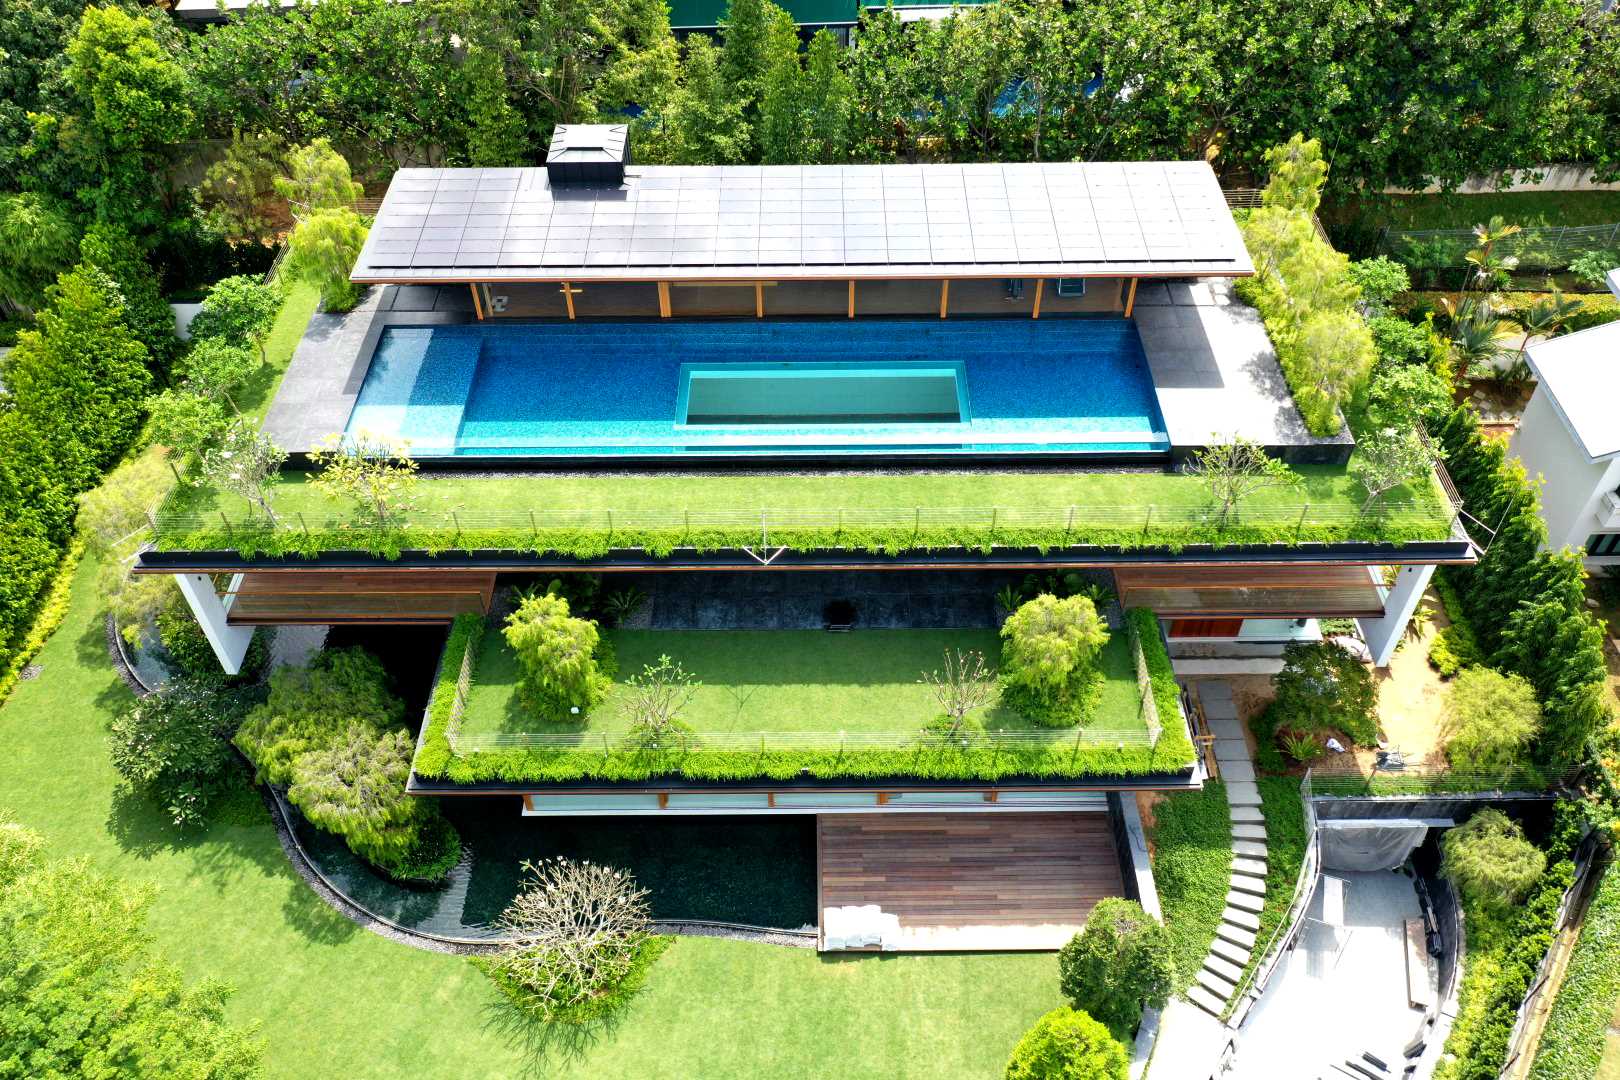 GUZ Architects has designed a new house in Singapore that has terraced roof gardens to keep the home cool.